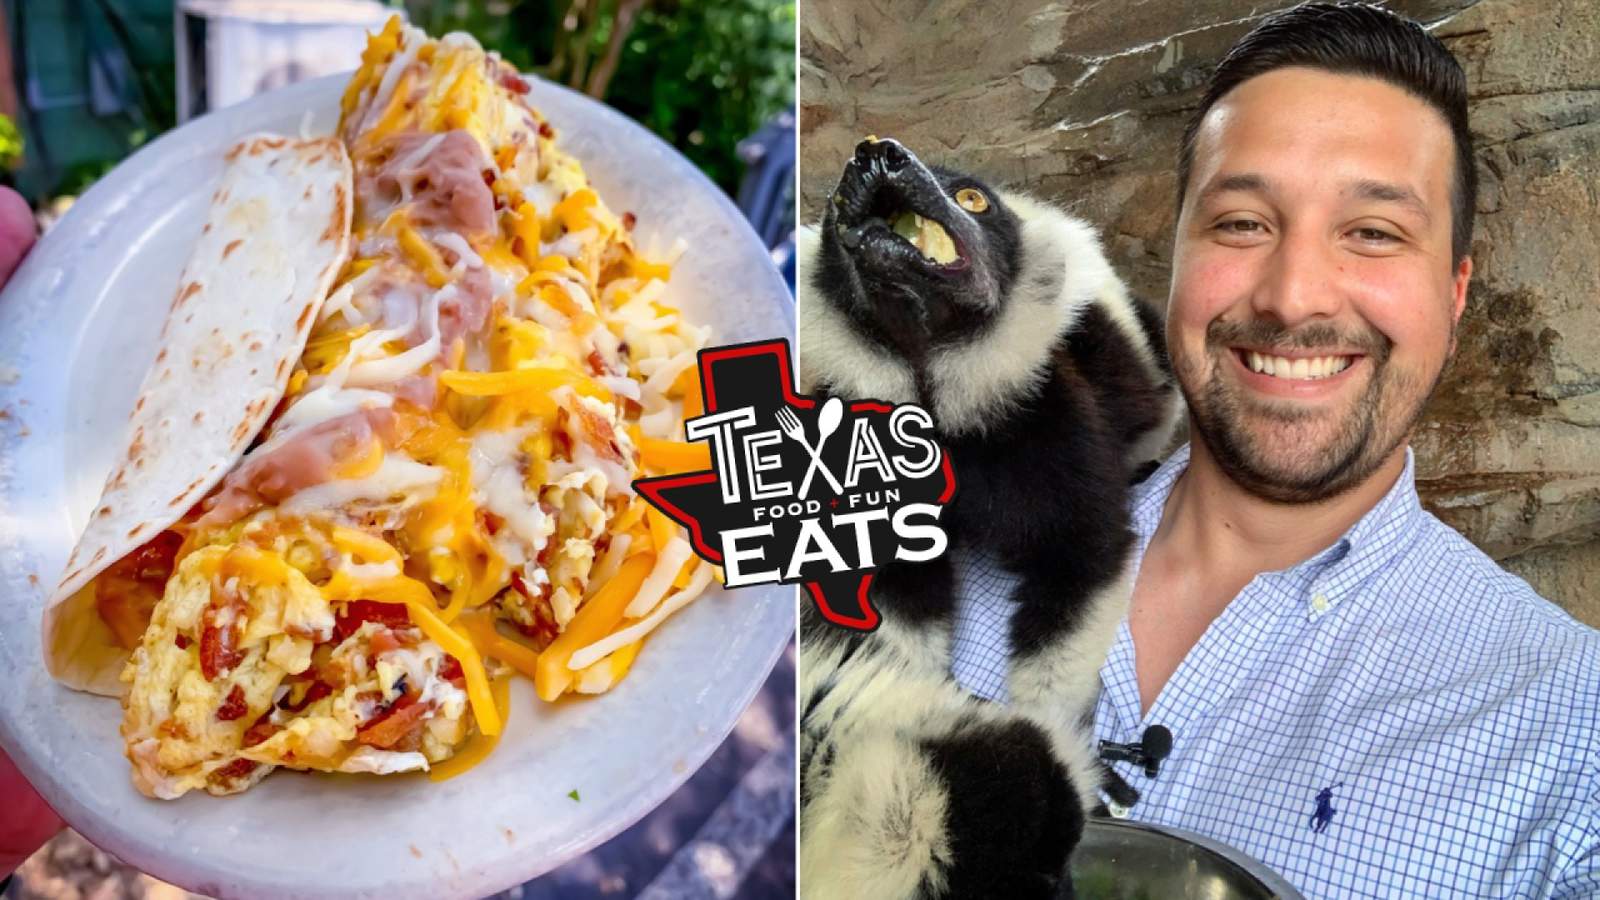 Texas Eats Episode 21: Wild about Food at the Snake Farm